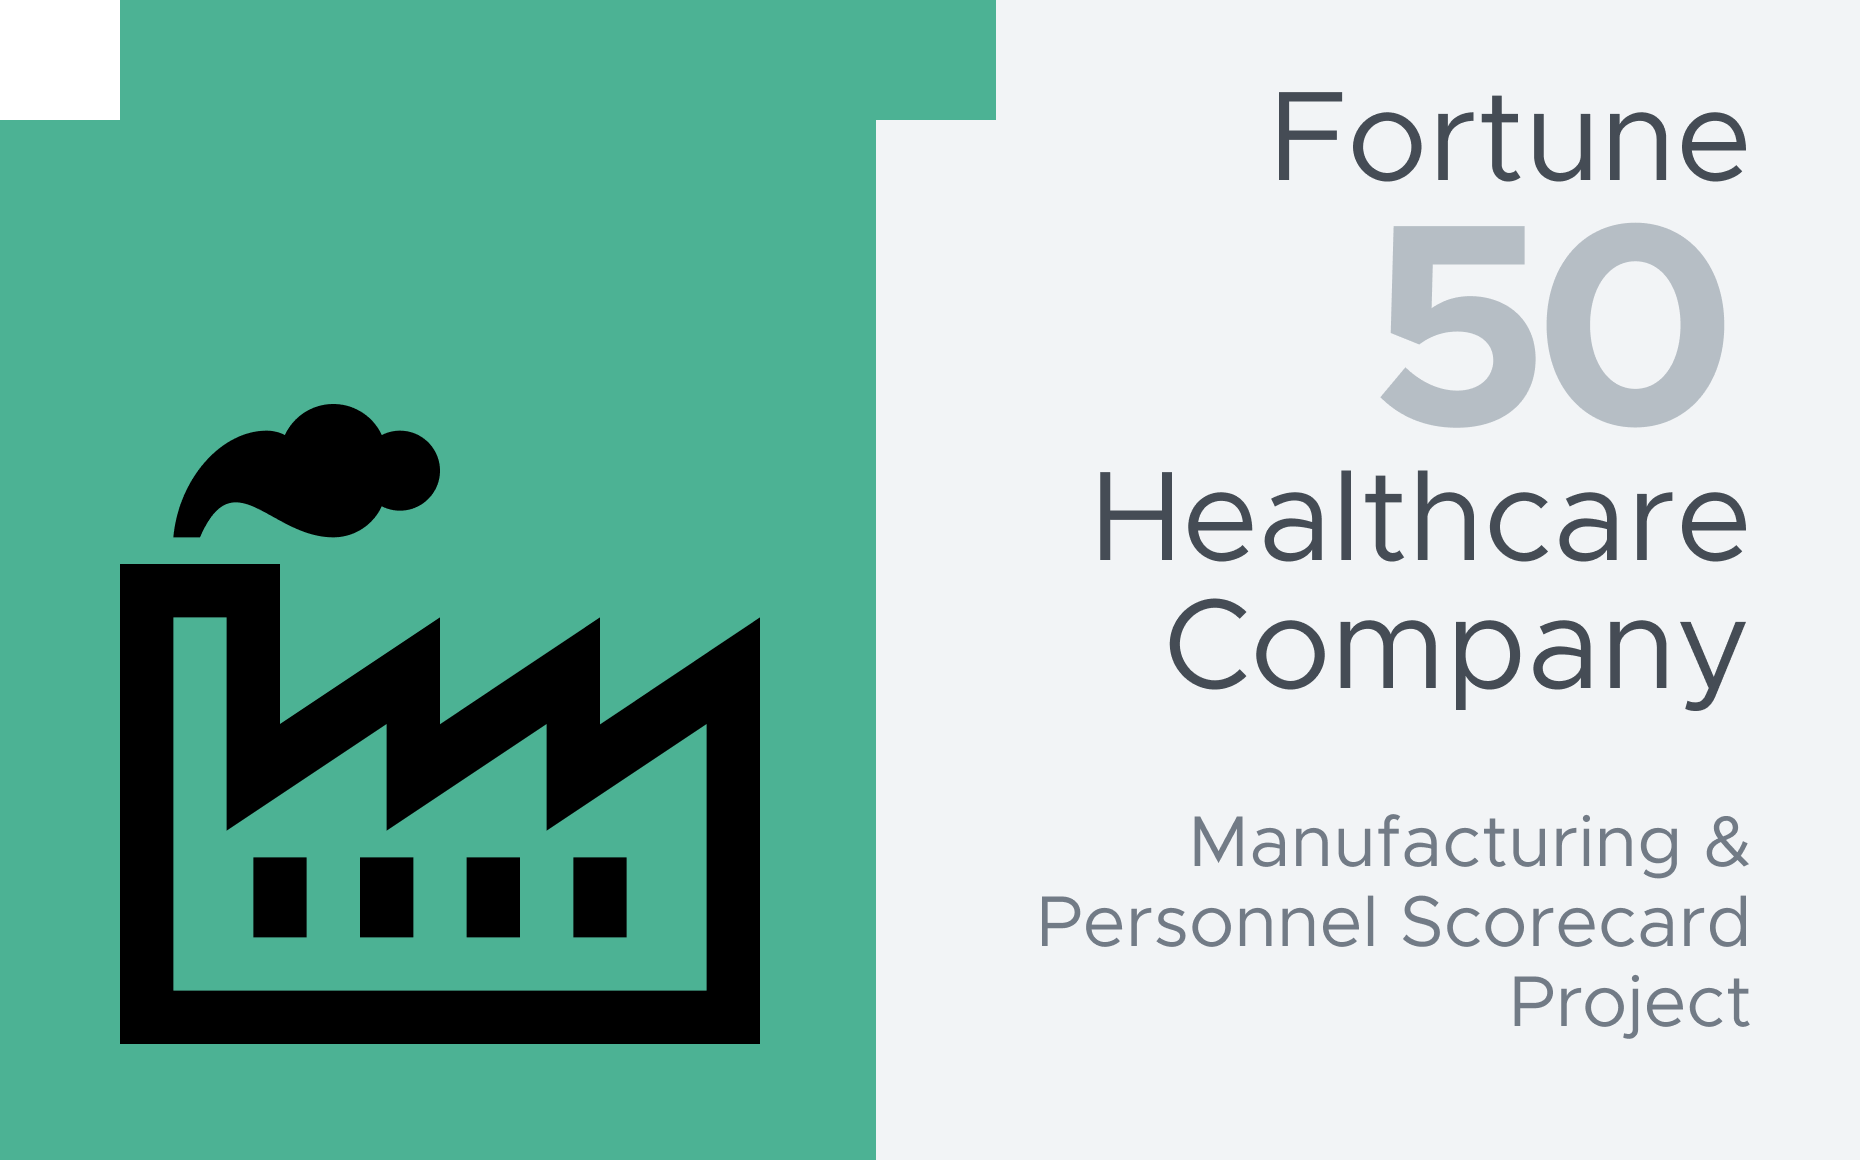 Fortune 50 Healthcare Company Uses bipp Scorecards to Get Greater Visibility into its Local and Global Manufacturing Operations